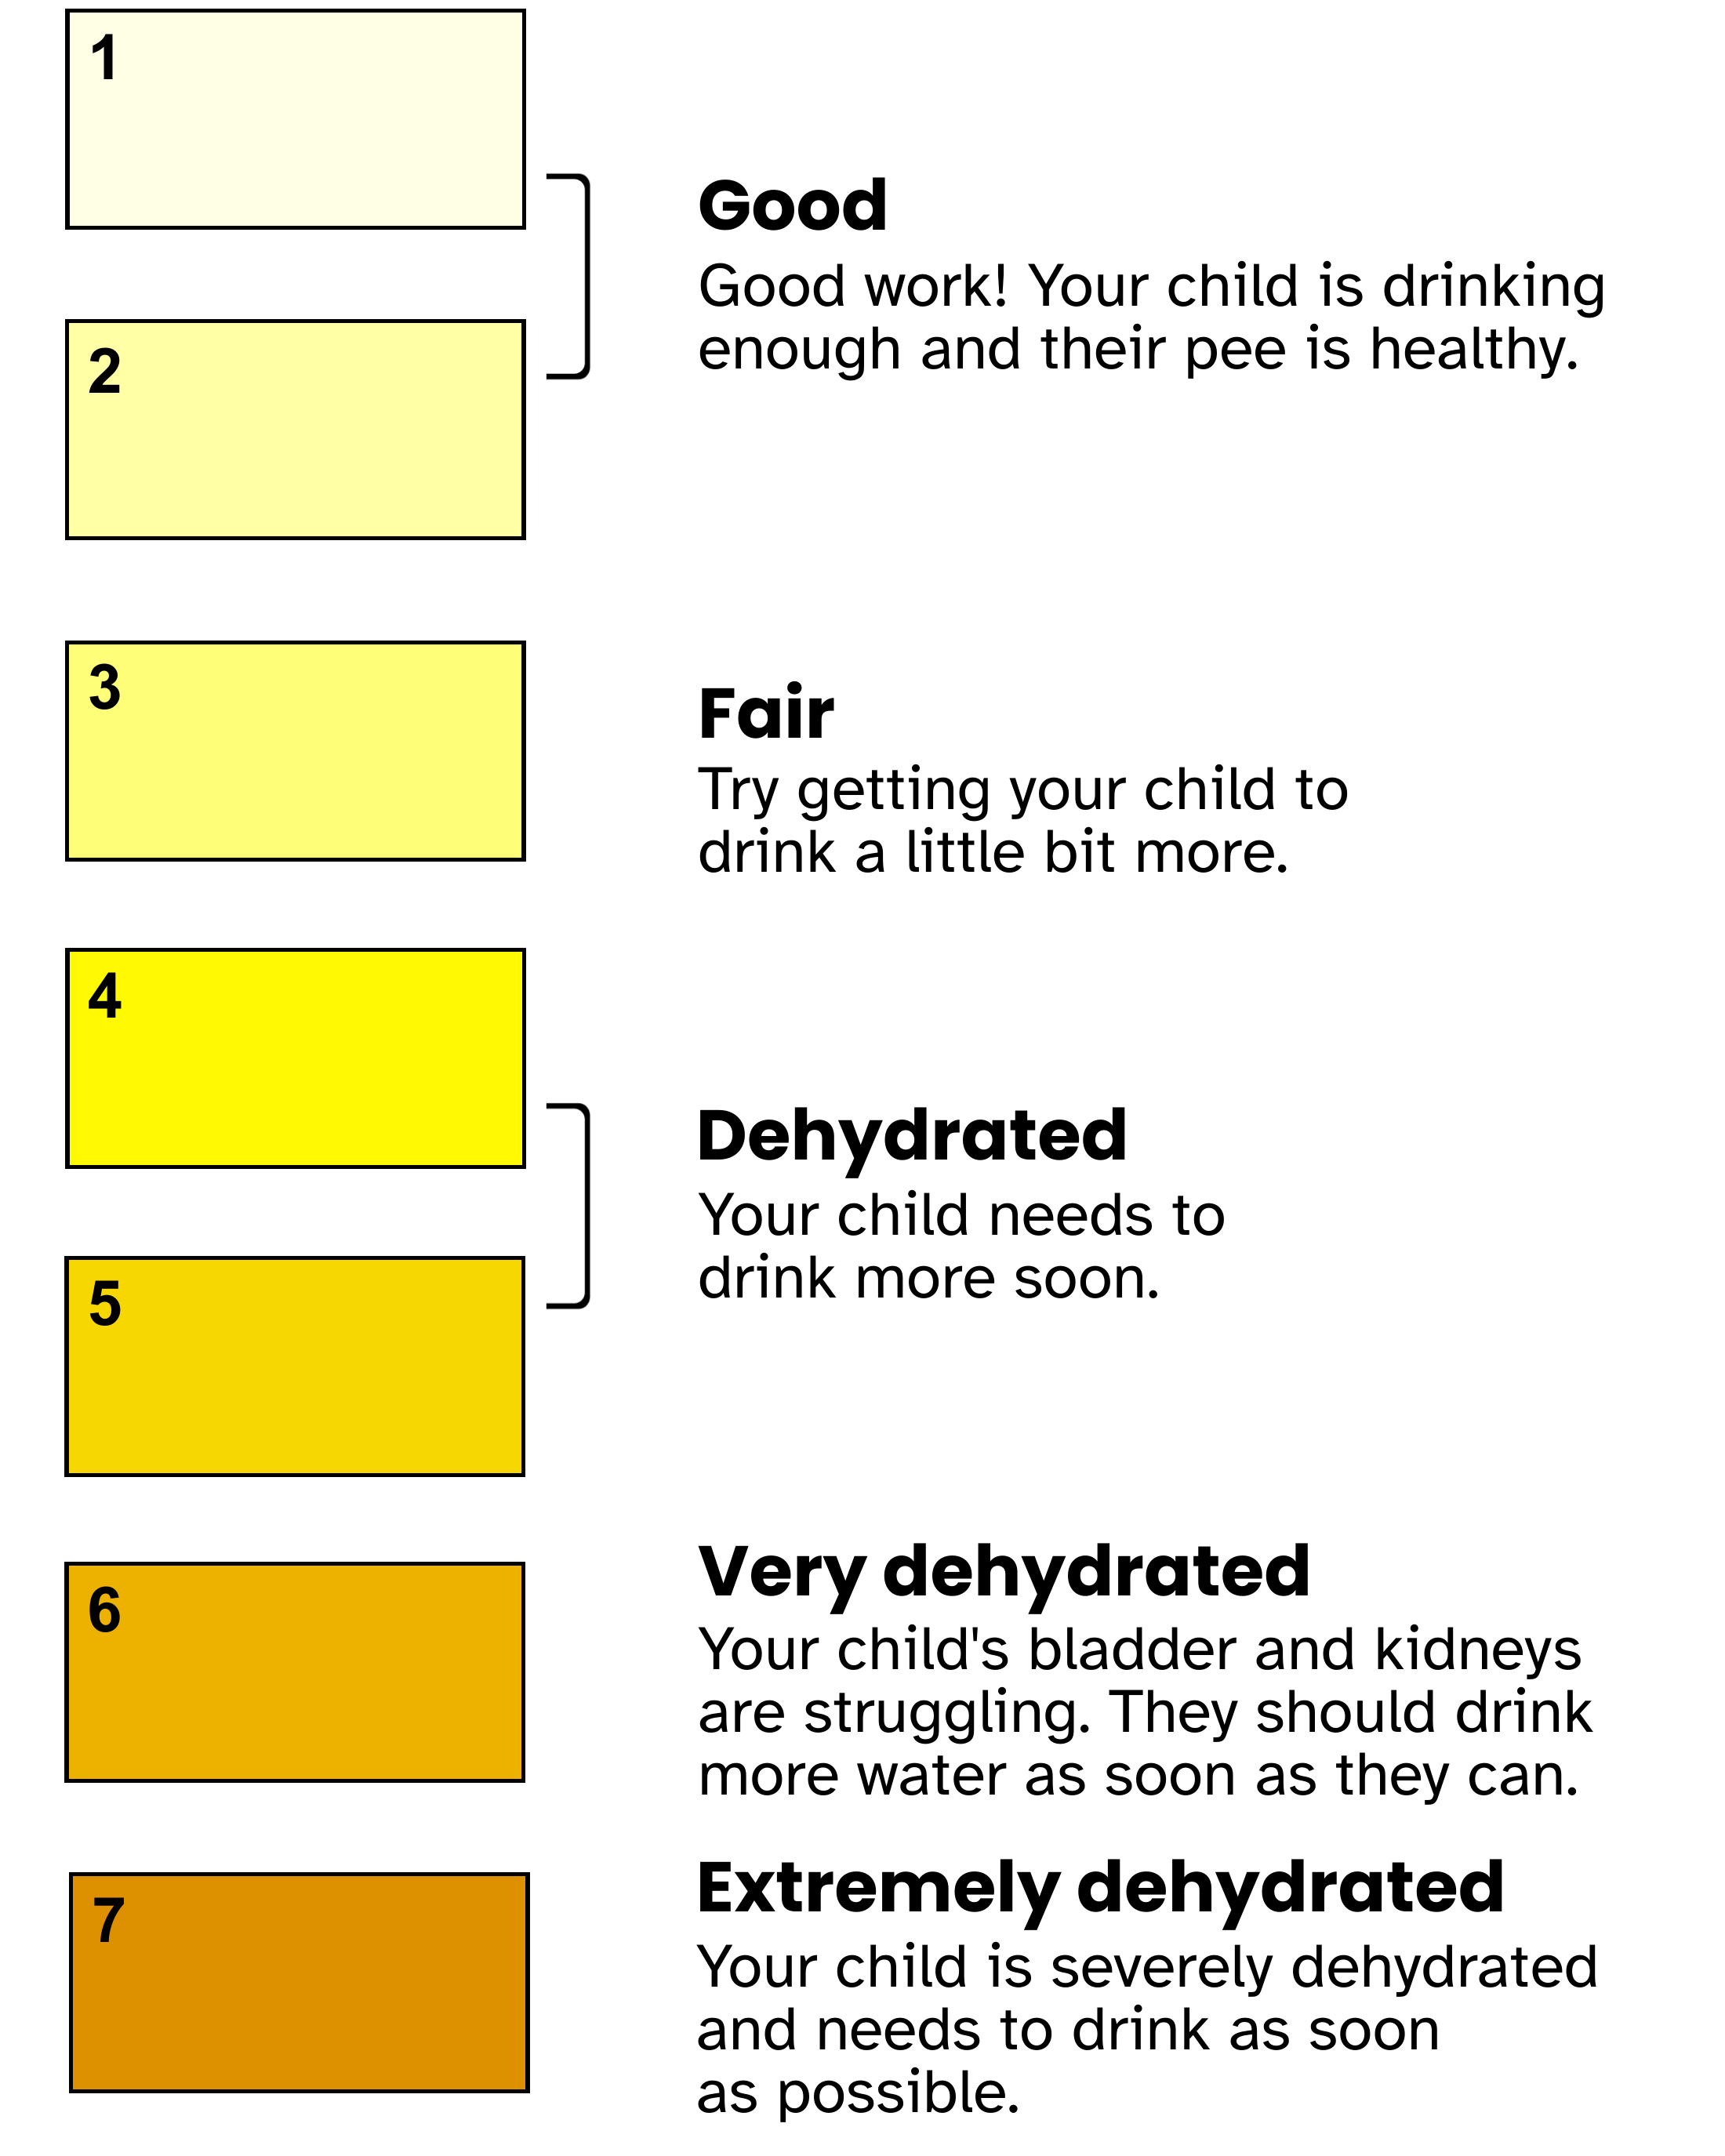 Colours 1 and 2 are pale yellow which means your child is drinking enough and their pee is healthy. Colour 3 is a light yellow that means they should drink a little more. Colour 4 is a darker yellow and colour 5 is orange which means they are dehydrated and need to drink more soon. Colour 6 is a dark orange and means they're very dehydrated. They need to drink more water as soon as they can. Colour 7 is dark orange/brown and means they are extremely dehydrated and needs to drink more water now. 